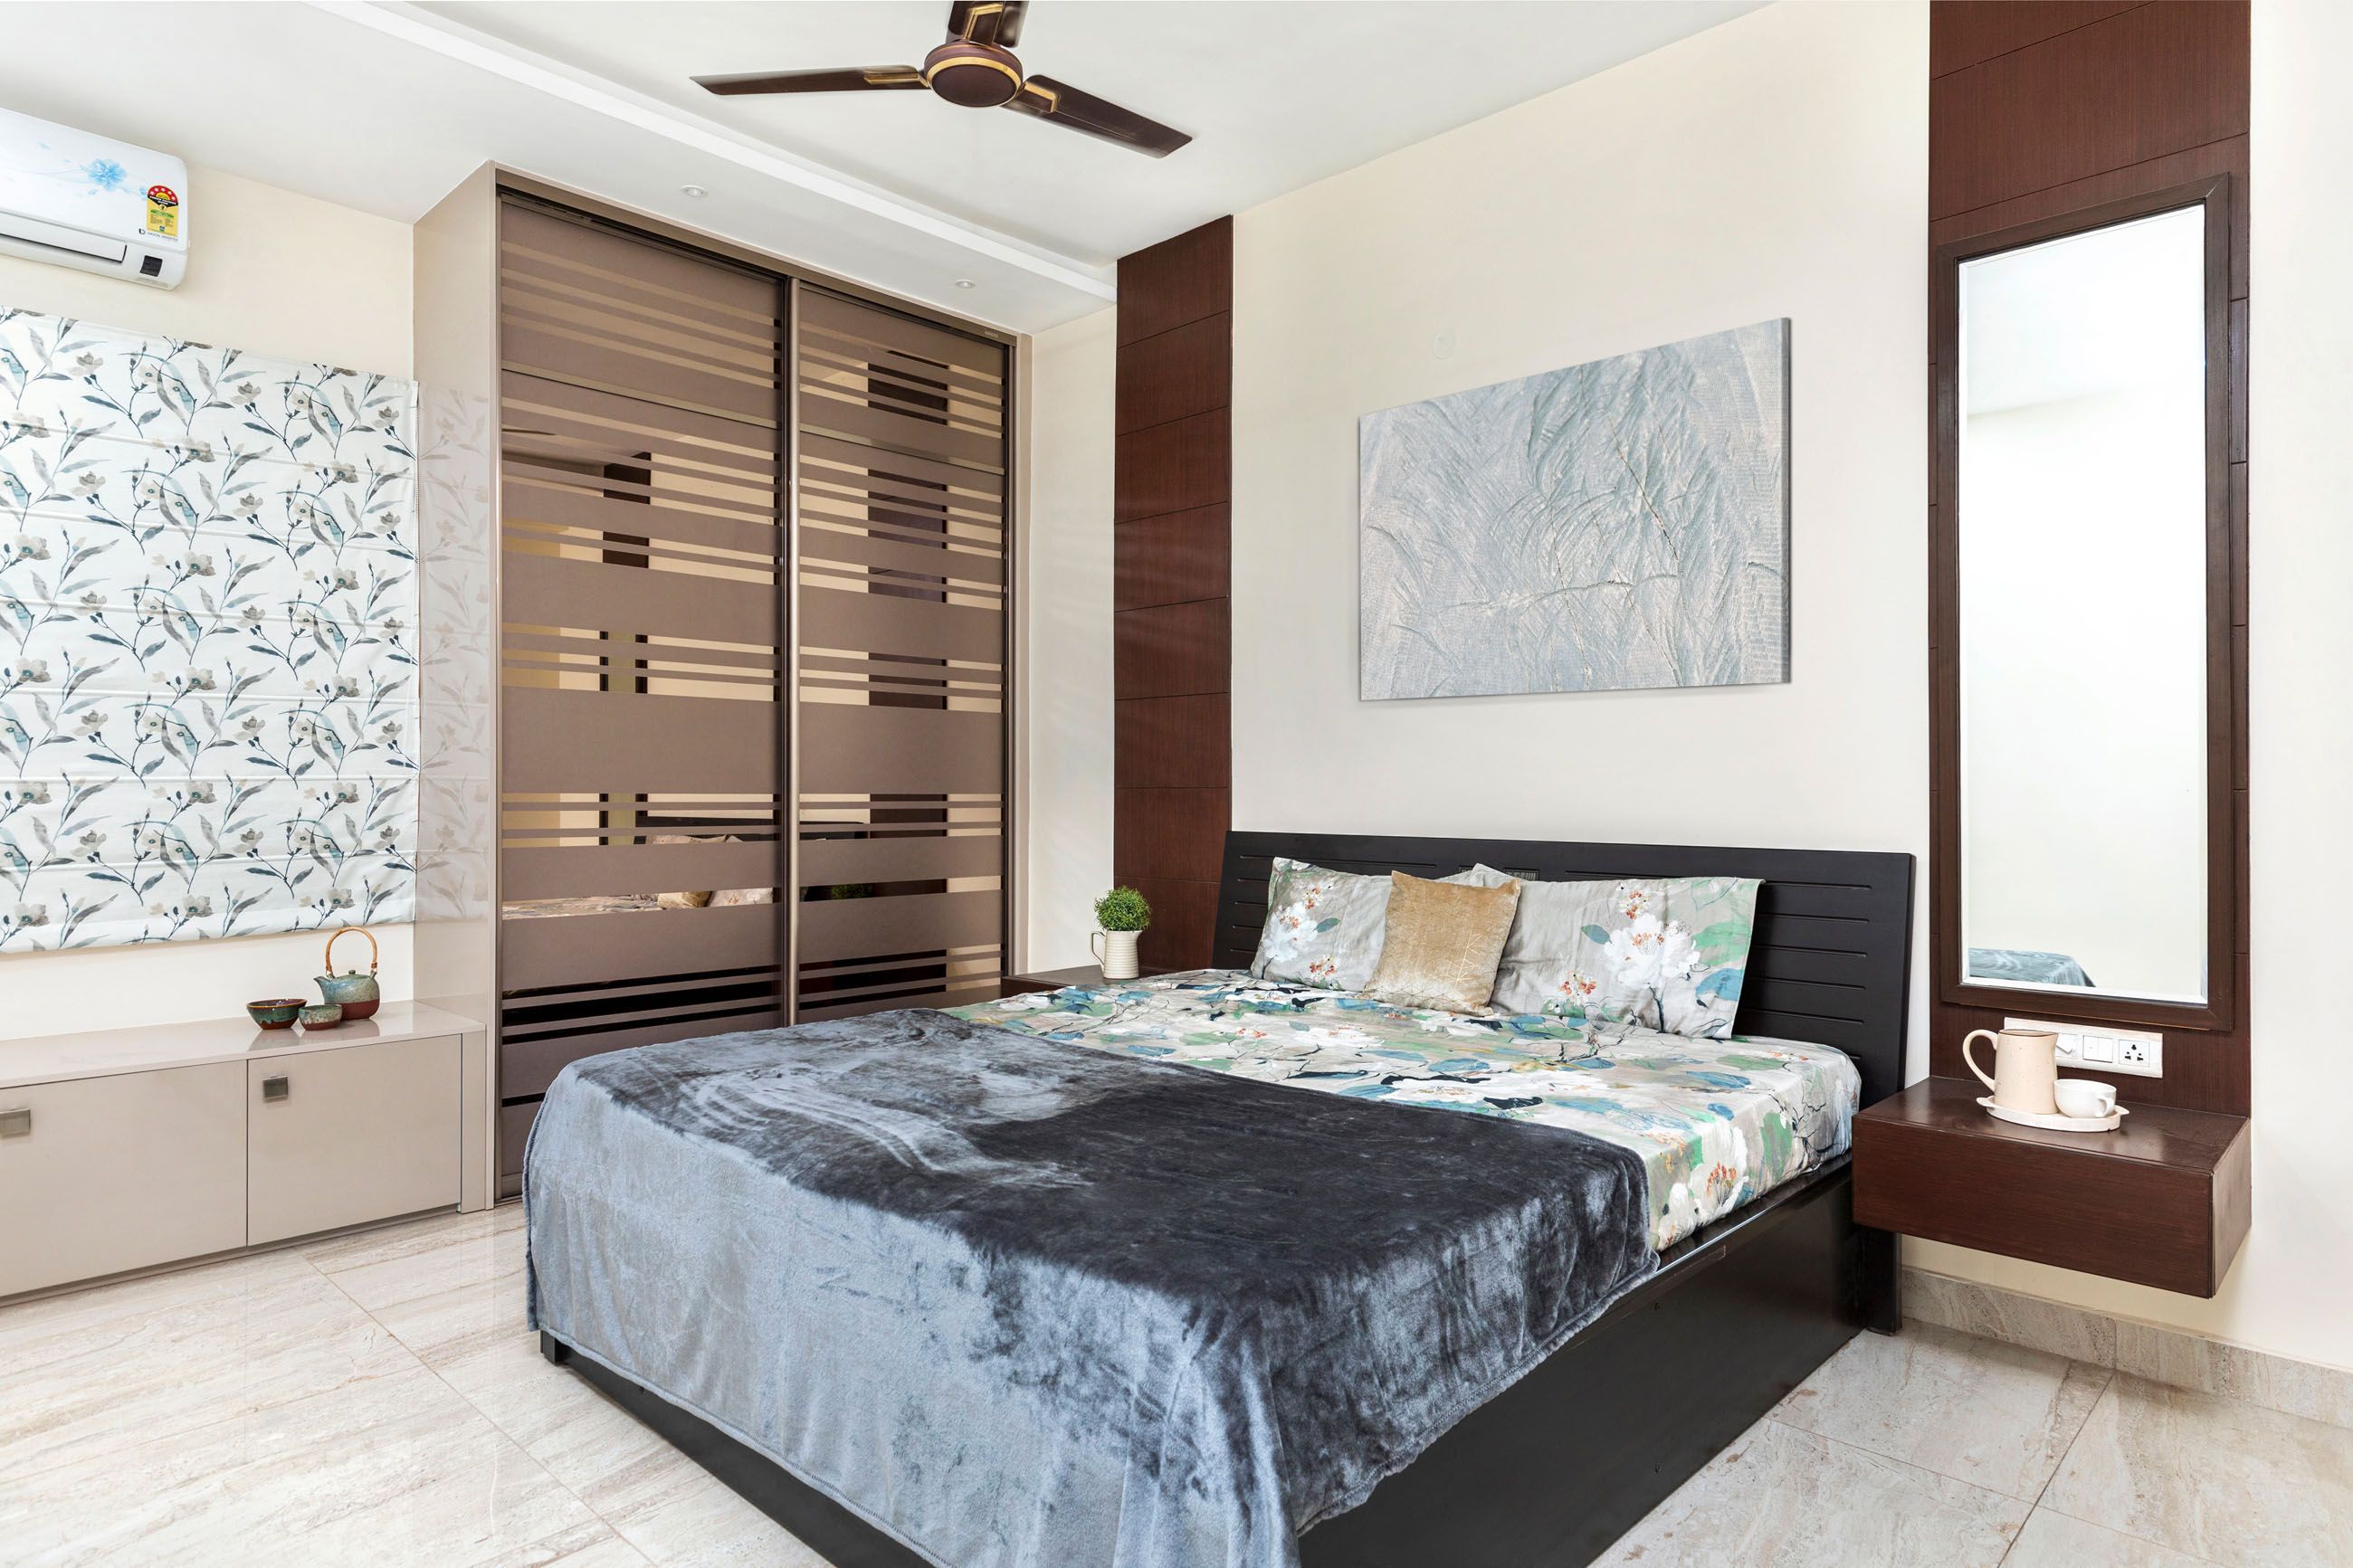 Modern Master Bedroom Design With Brown And Glass Shutter Wardrobe